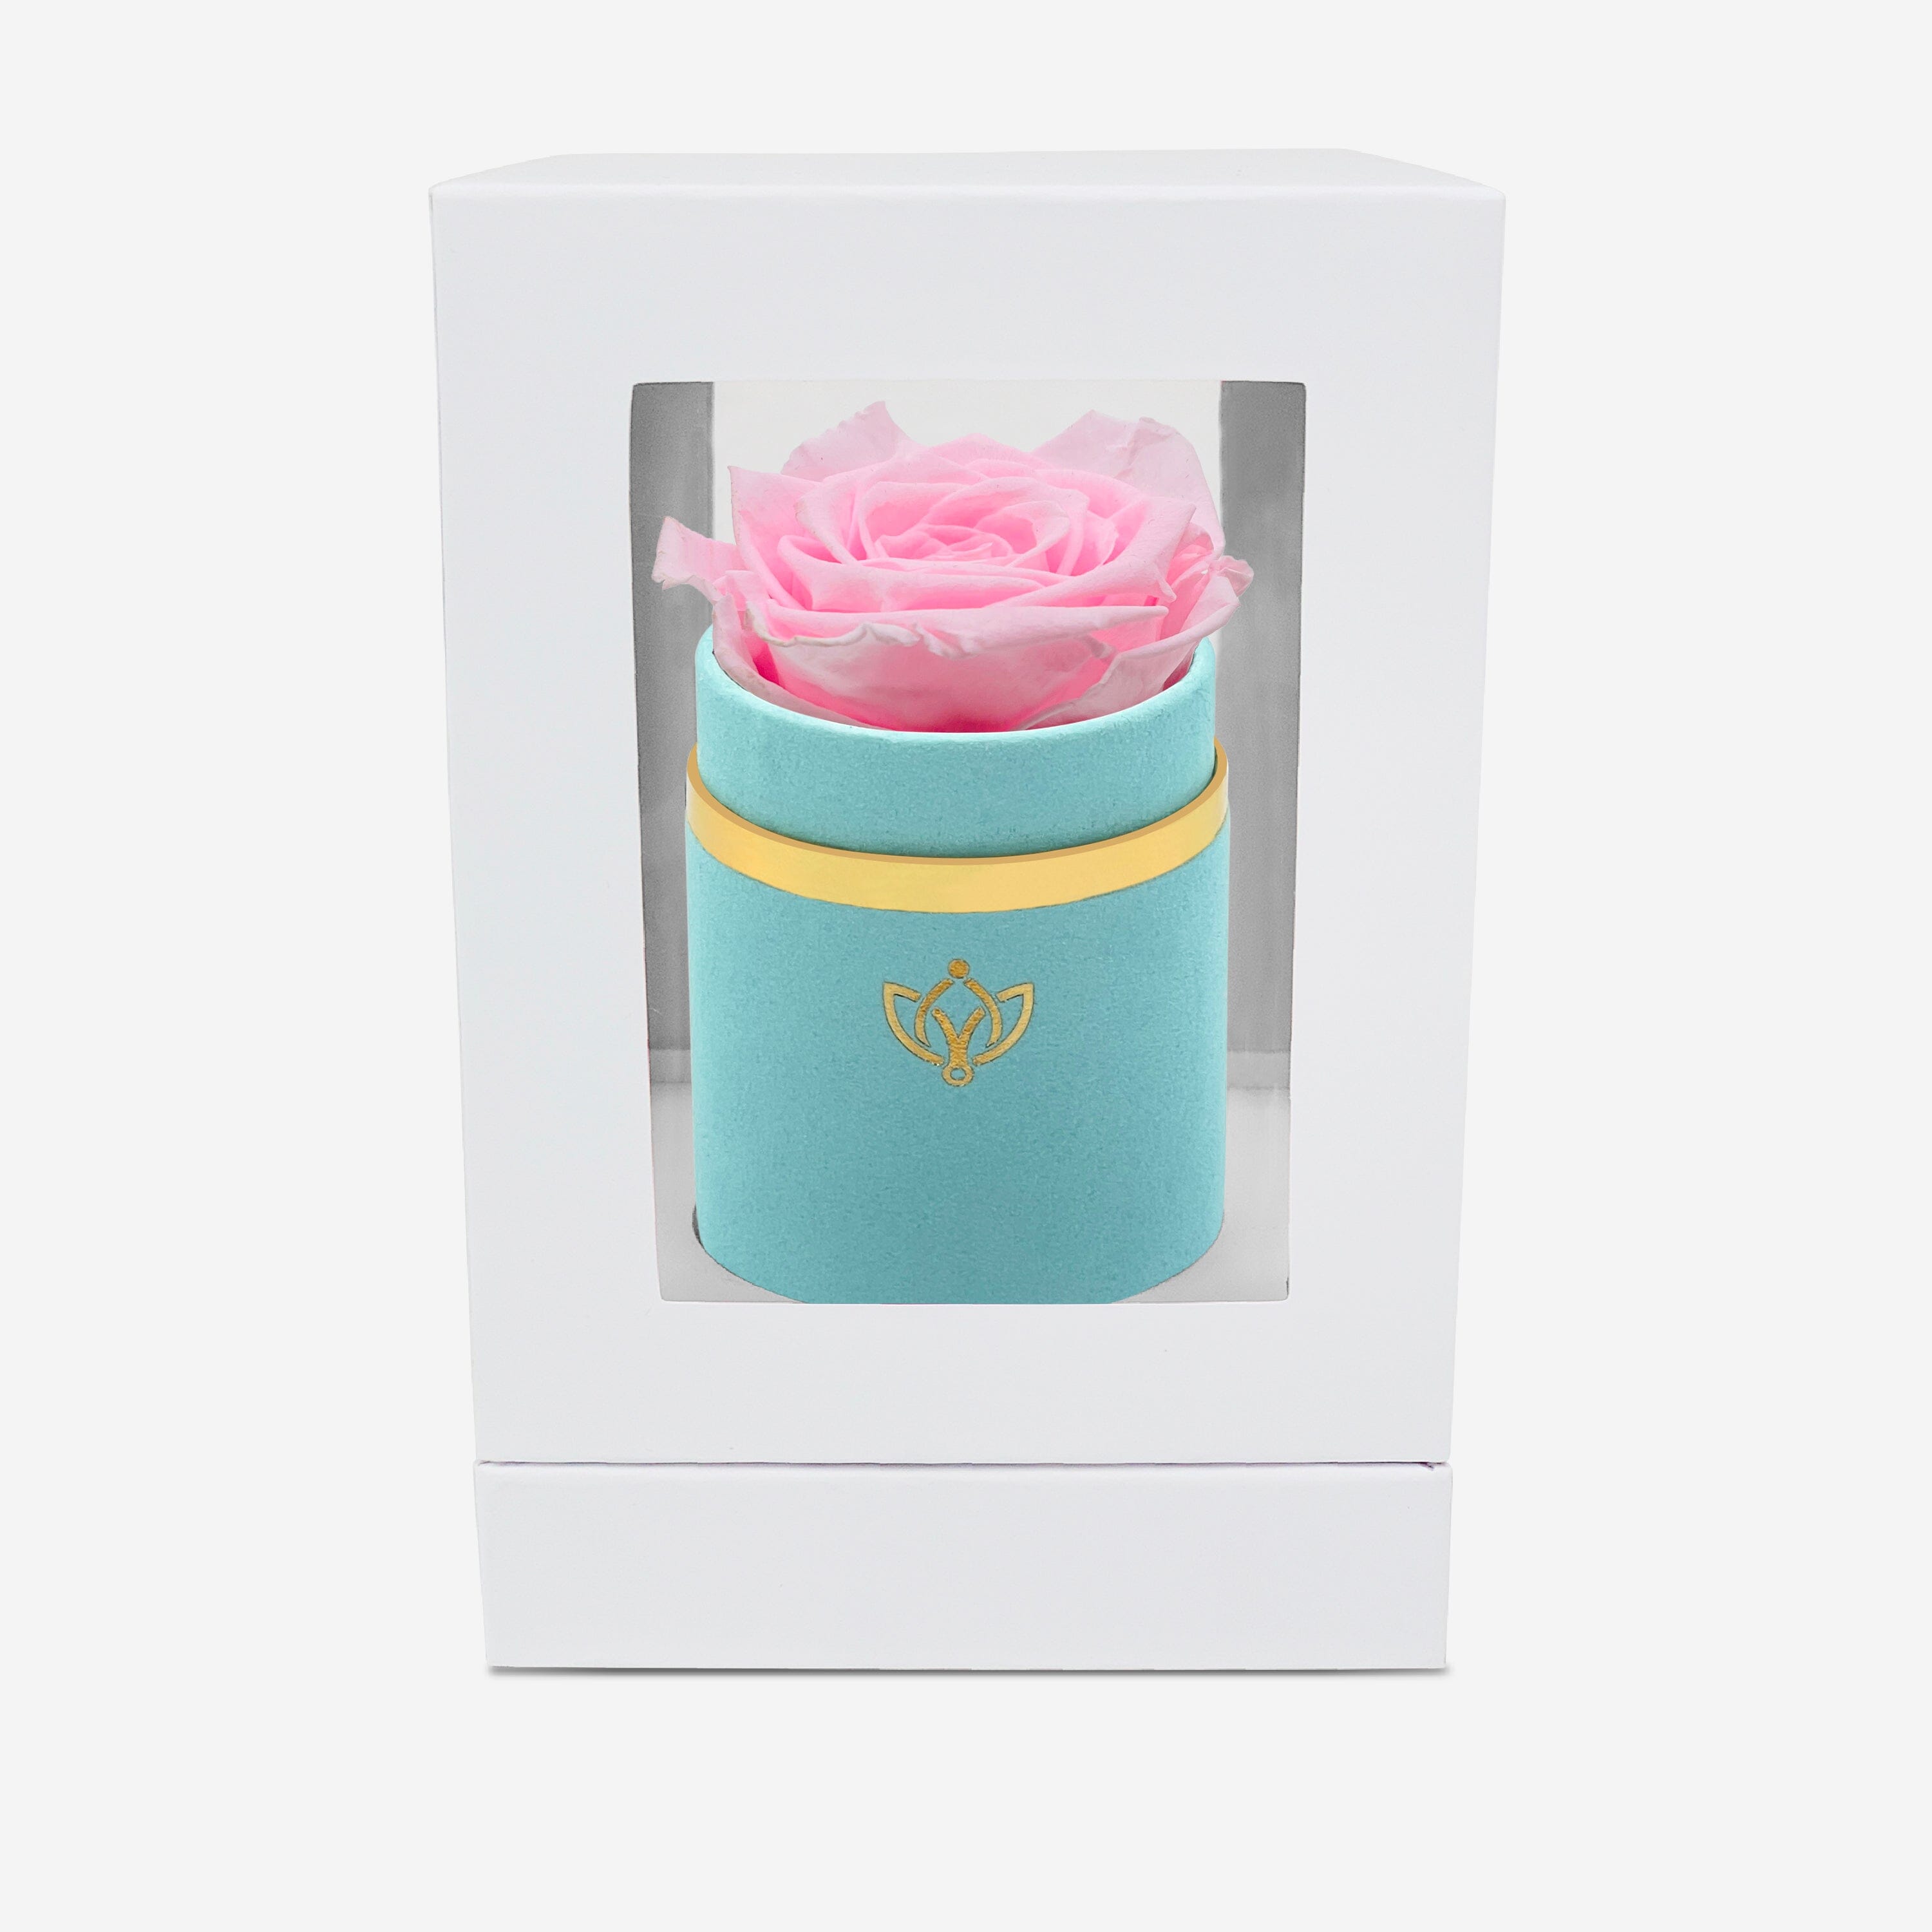 Single Mint Green Suede Box | Pink Lace Rose - The Million Roses